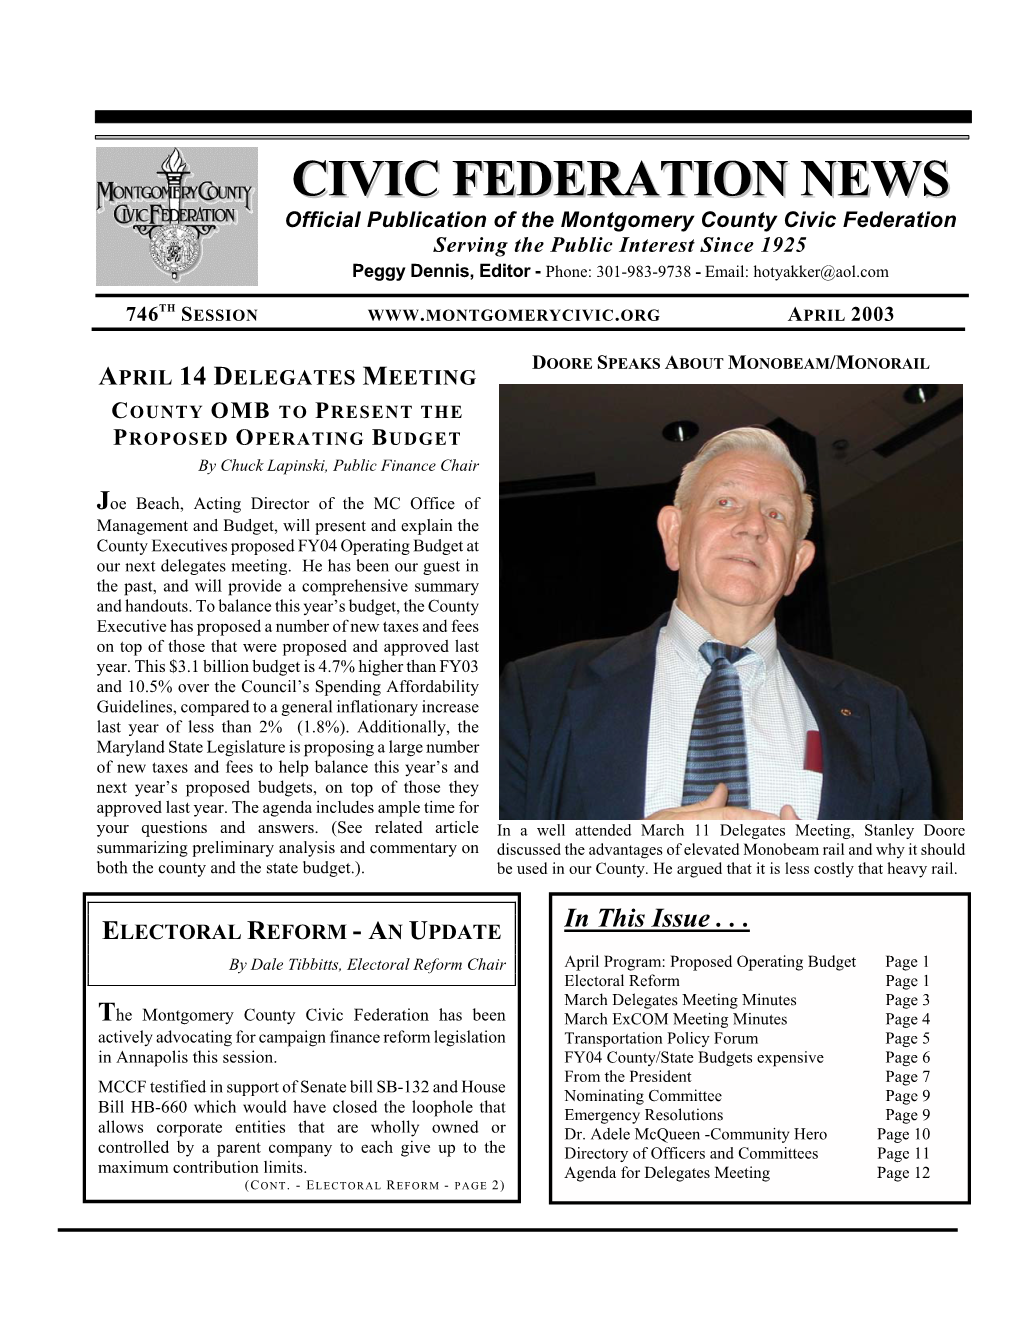 Civic Federation News – April 2003, Page 2